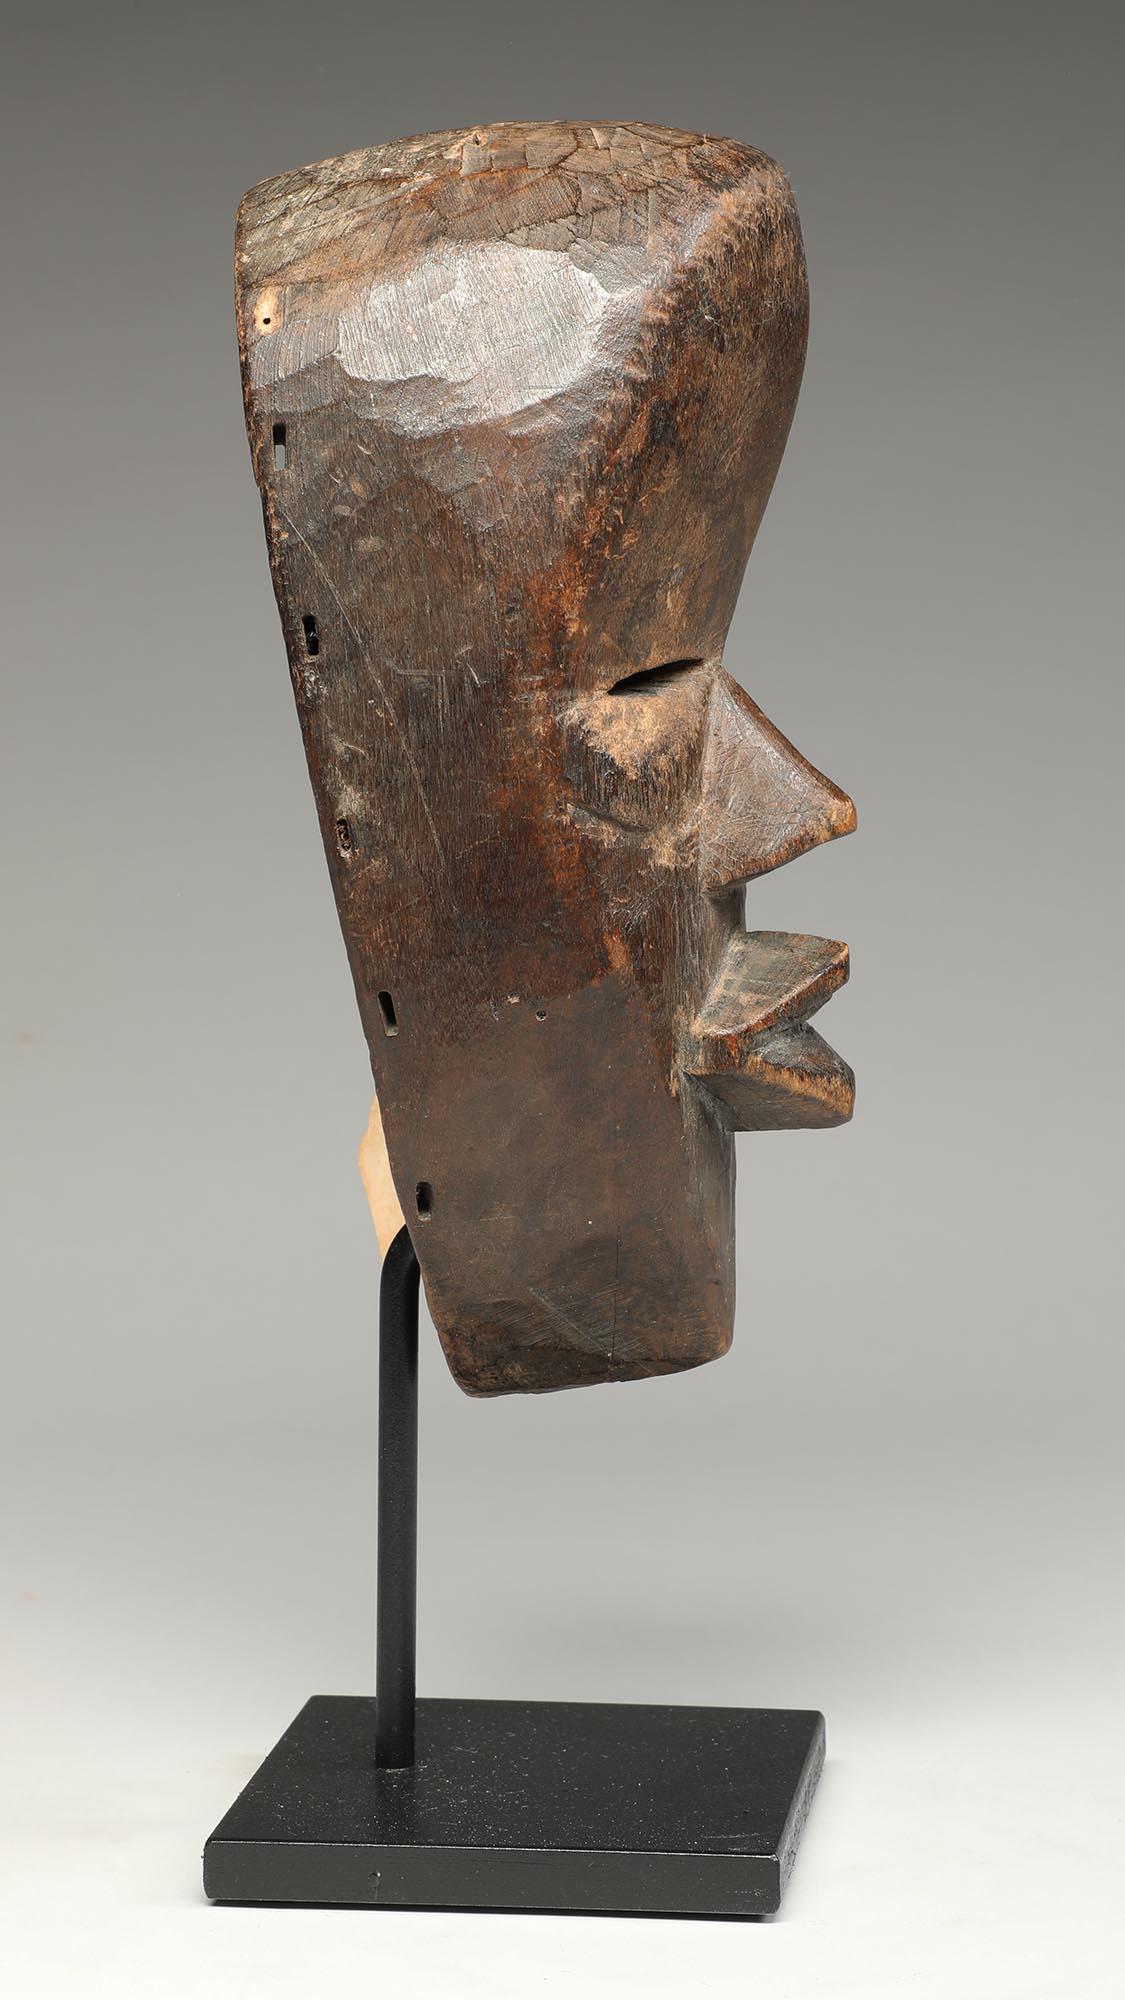 Ivorian Small Old Dan Mask Blessed by Age Eroded Side, Cubist Face Liberia, Africa